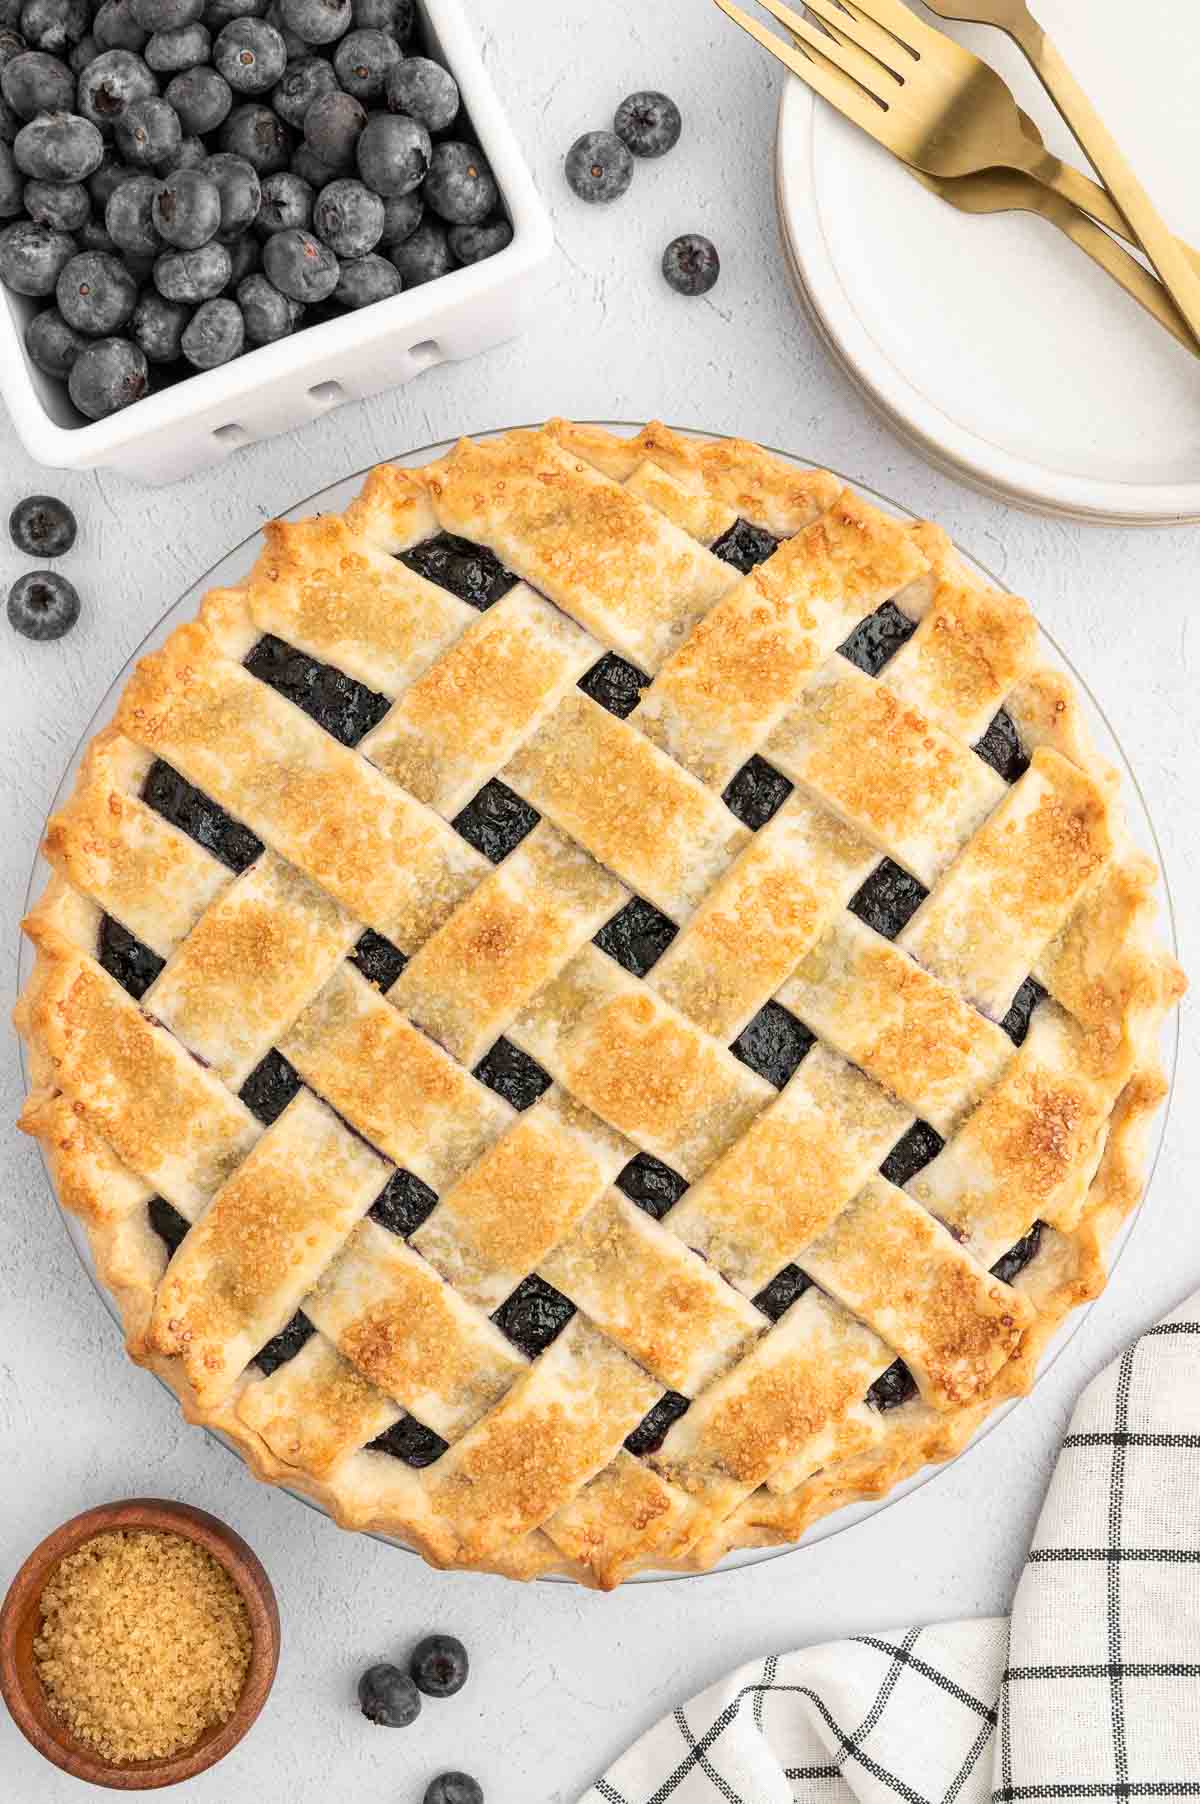 A whole vegan blueberry pie with a golden lattice crust, sitting next to a carton of blueberries.